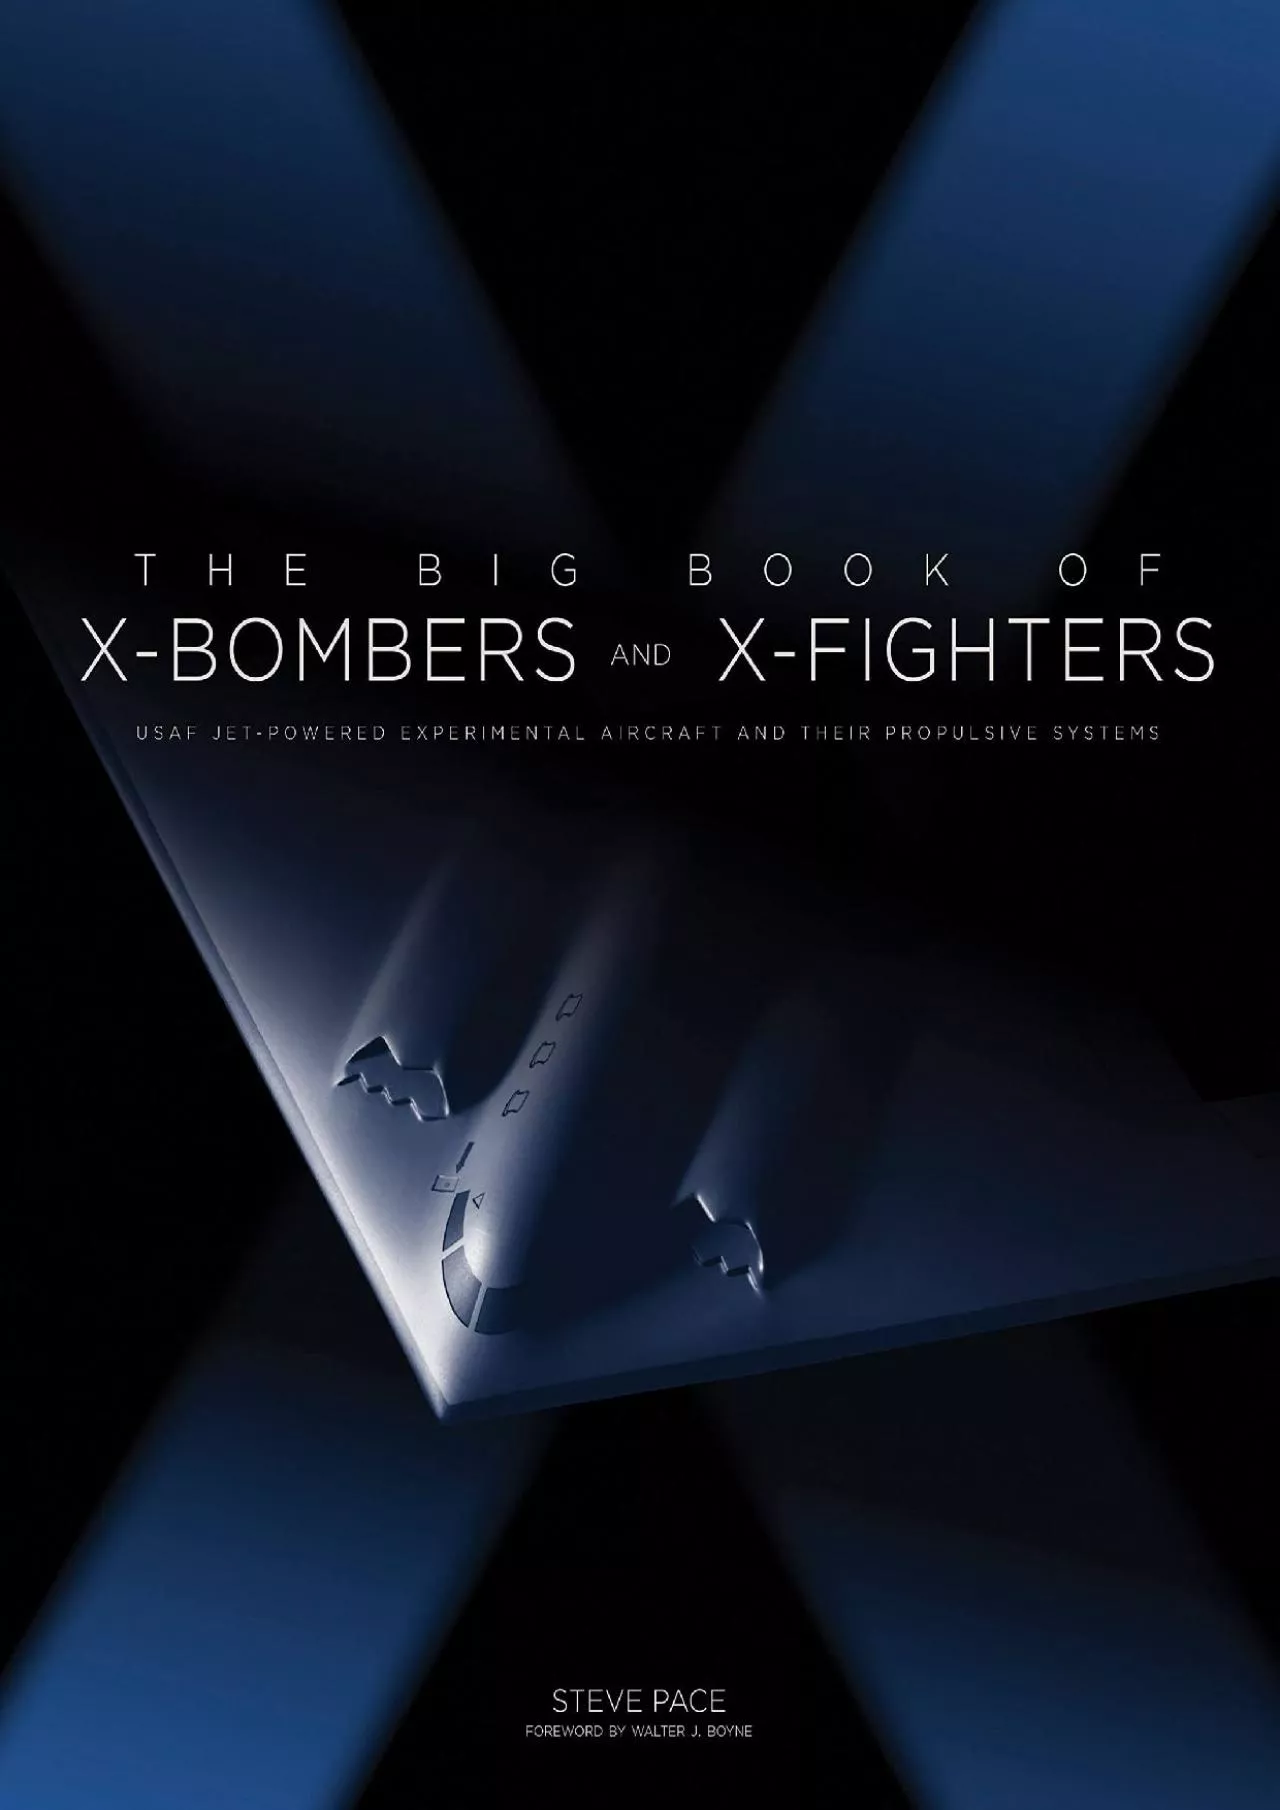 (DOWNLOAD)-The Big Book of X-Bombers & X-Fighters: USAF Jet-Powered Experimental Aircraft